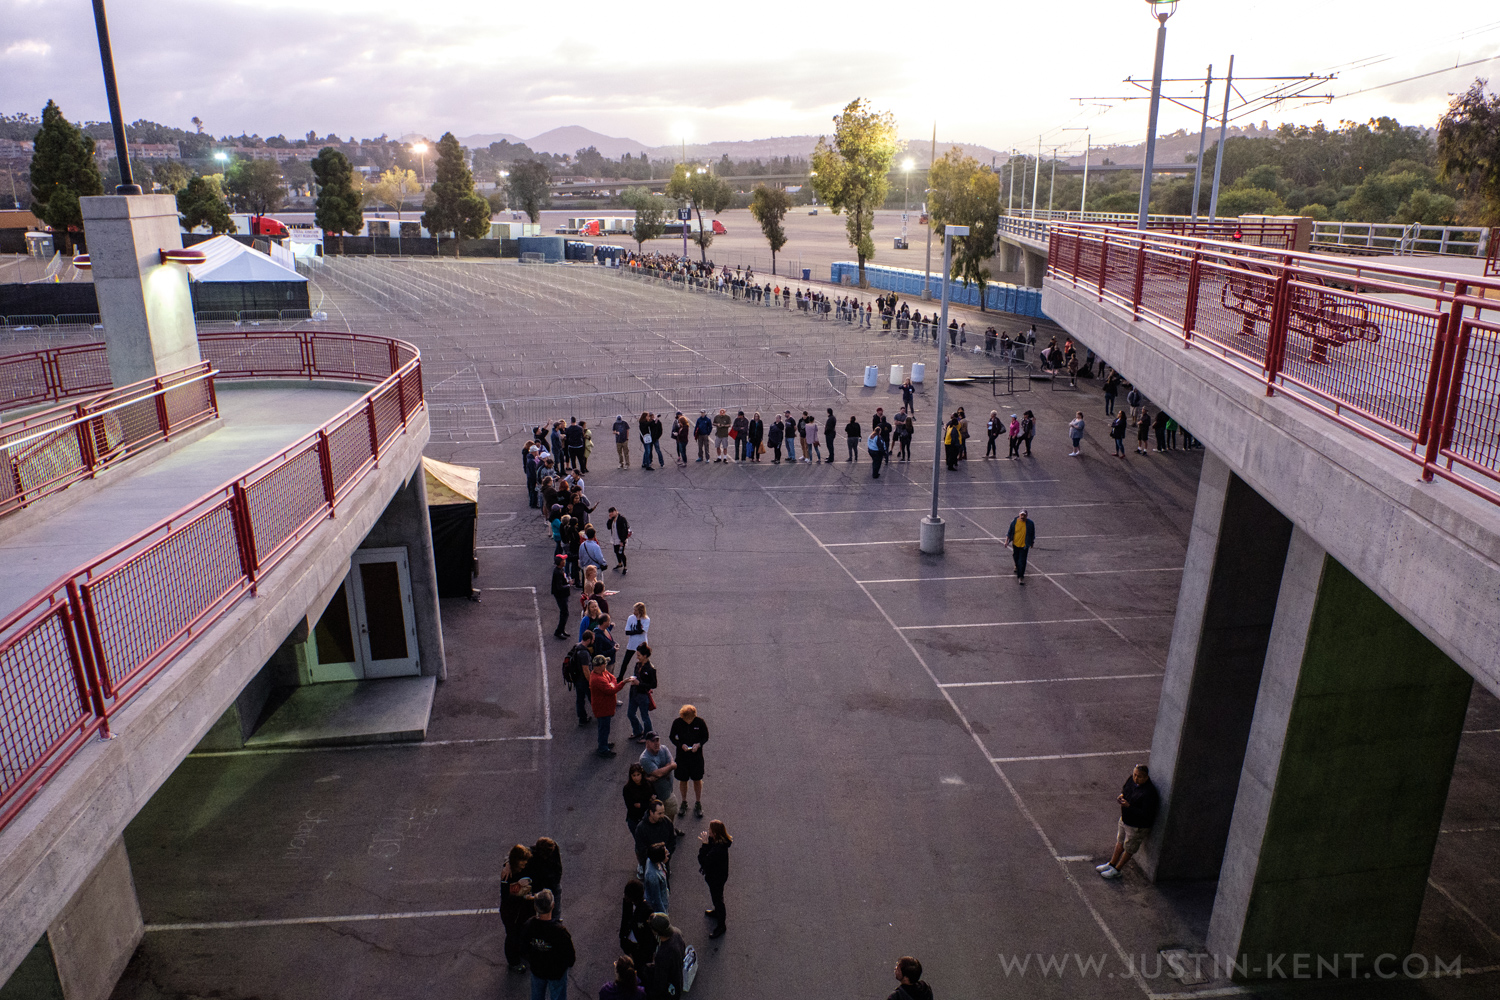 The line was over 300 people by 6:30AM